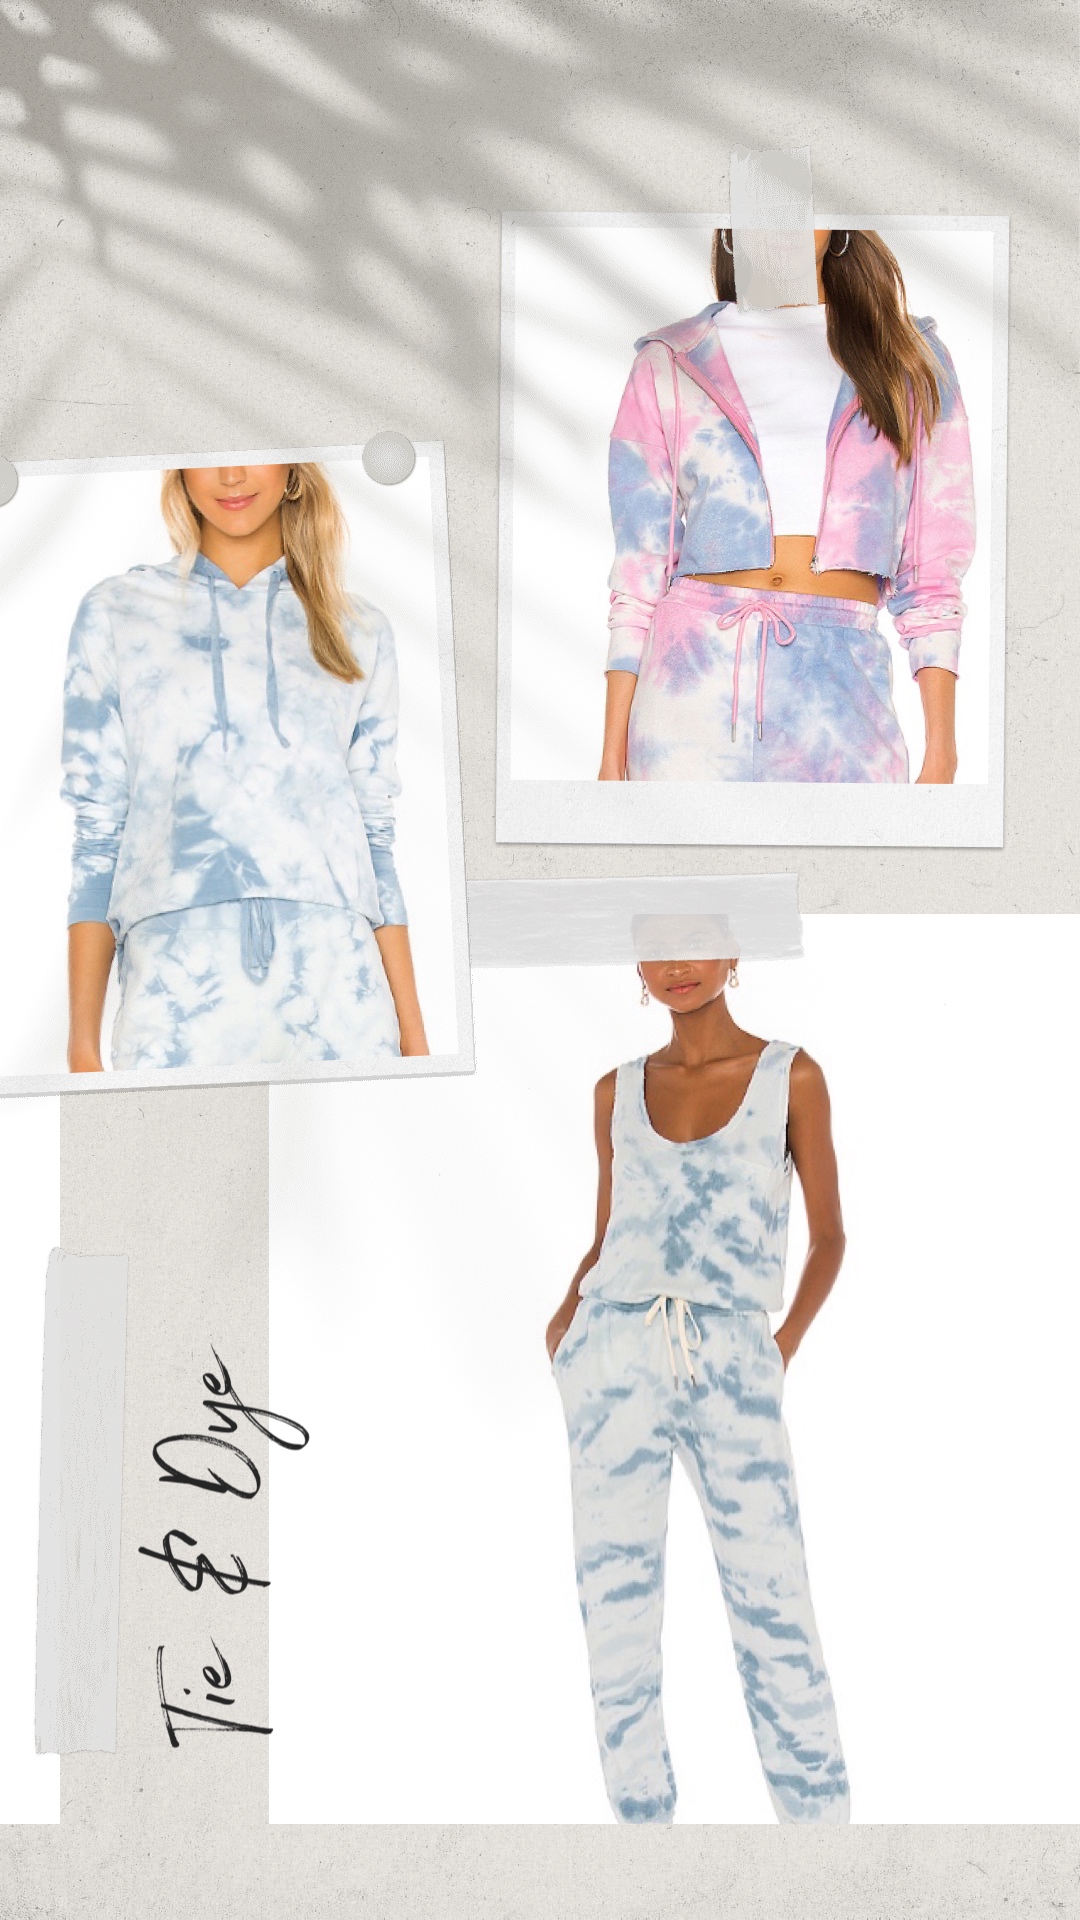 Instagram Is Obsessed With The Latest Tie And Dye Trend. Here Is All You Need!